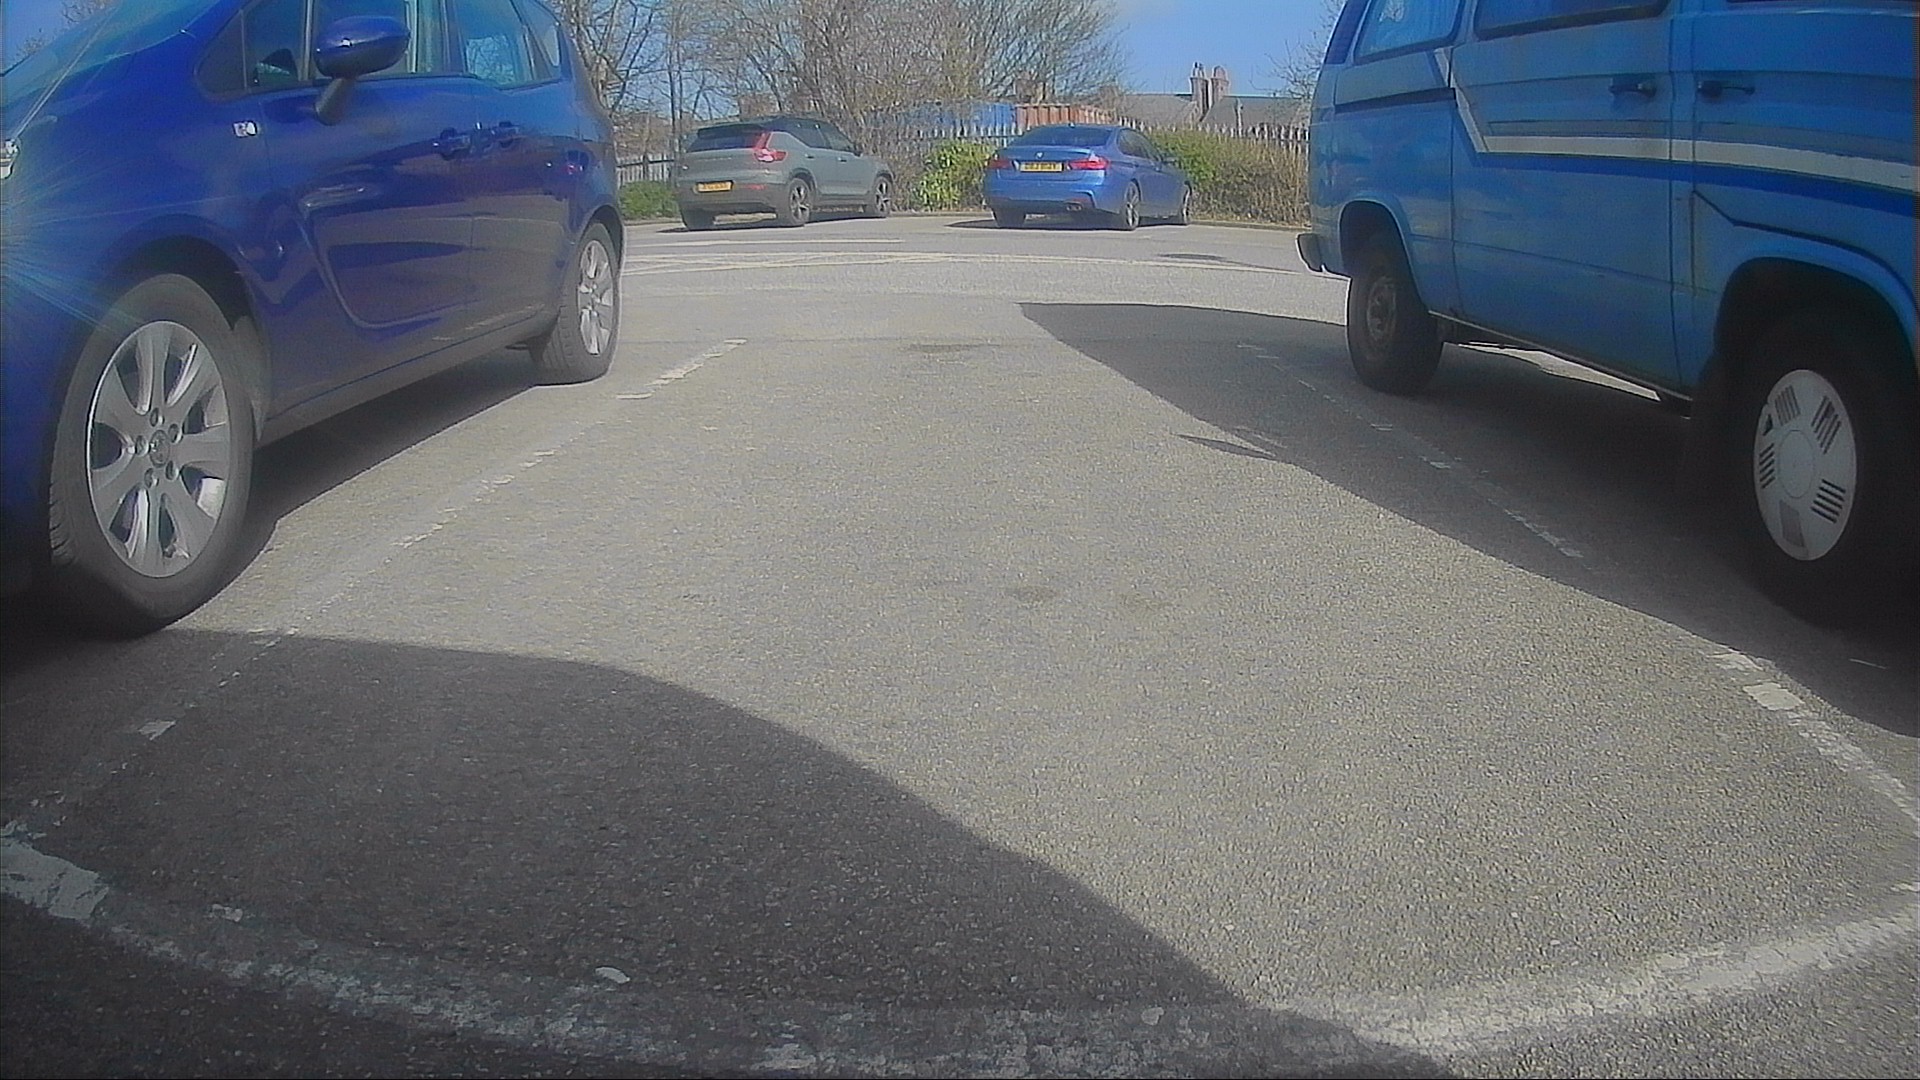 Rearview camera output in Asda car park